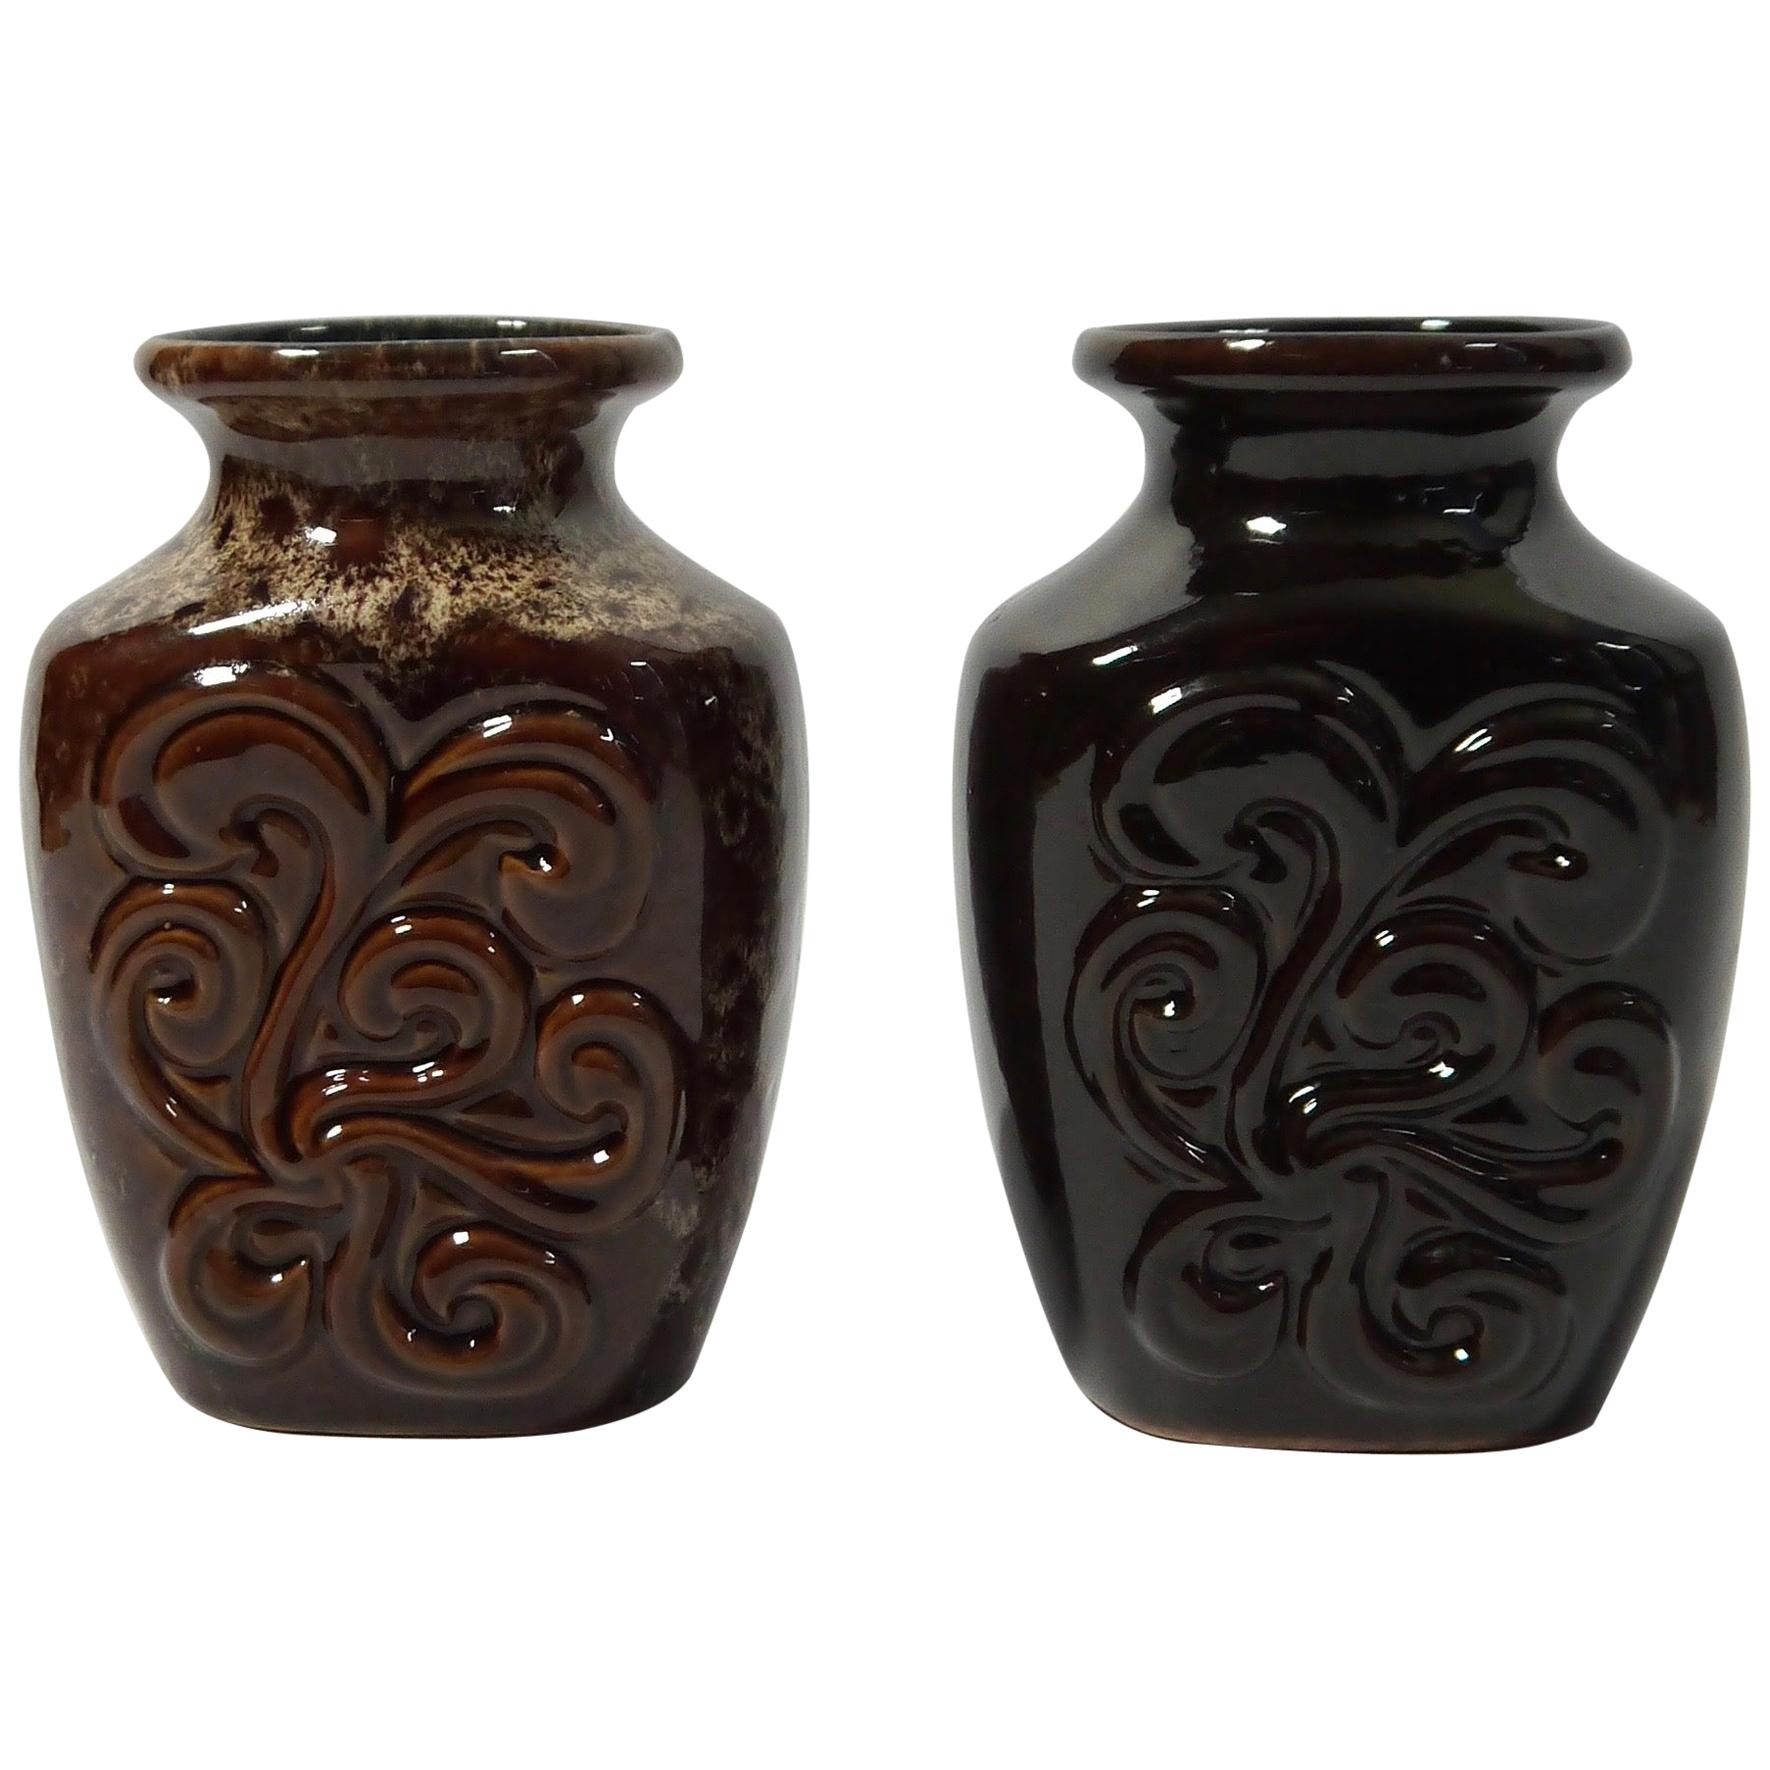 Pair of Fat Lava German Pottery Vases by Strehla, East Germany, 1960s